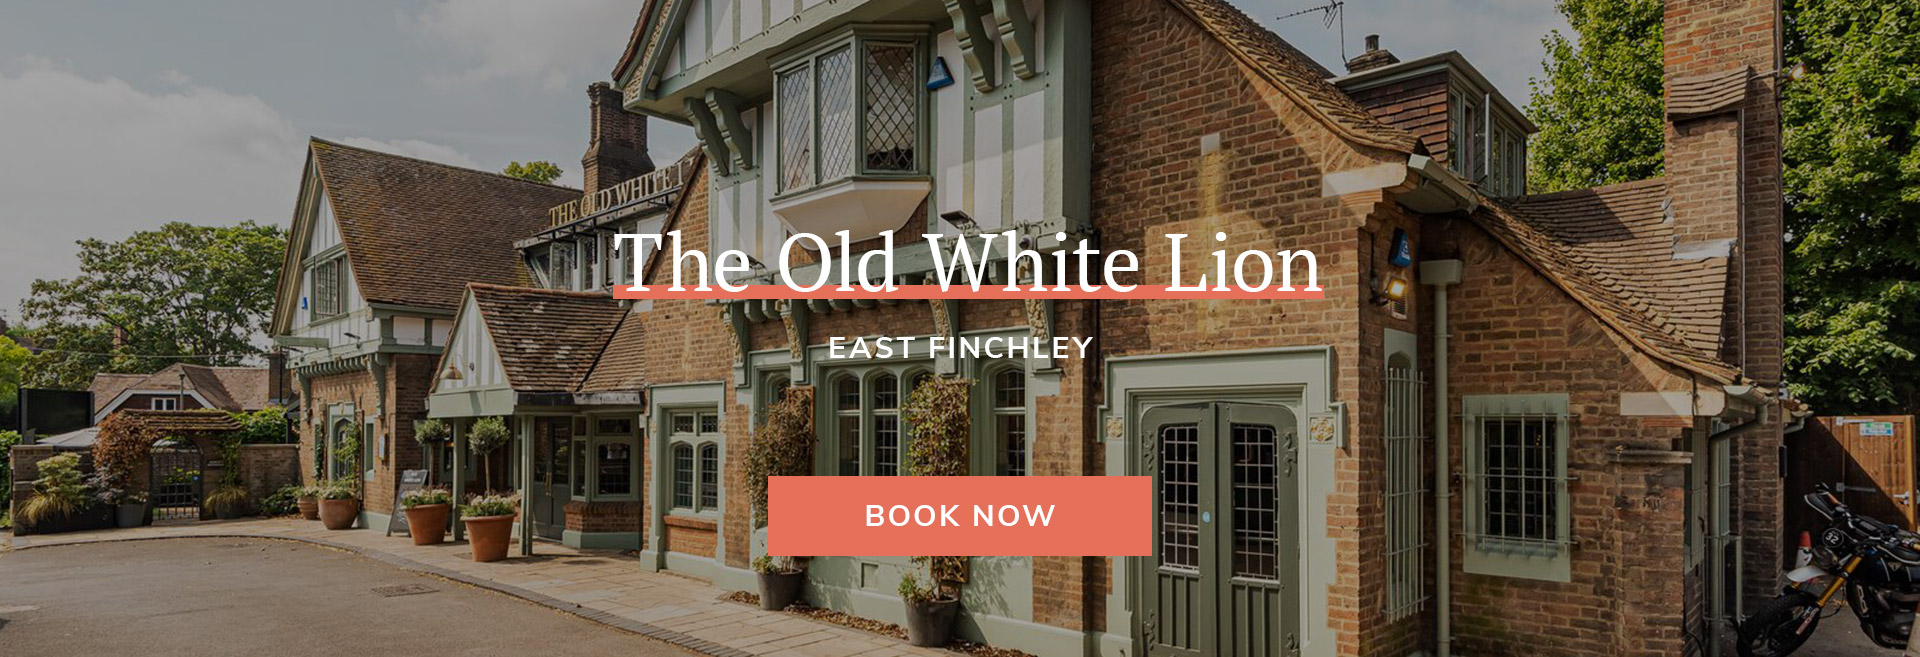 The Old White Lion Banner 1